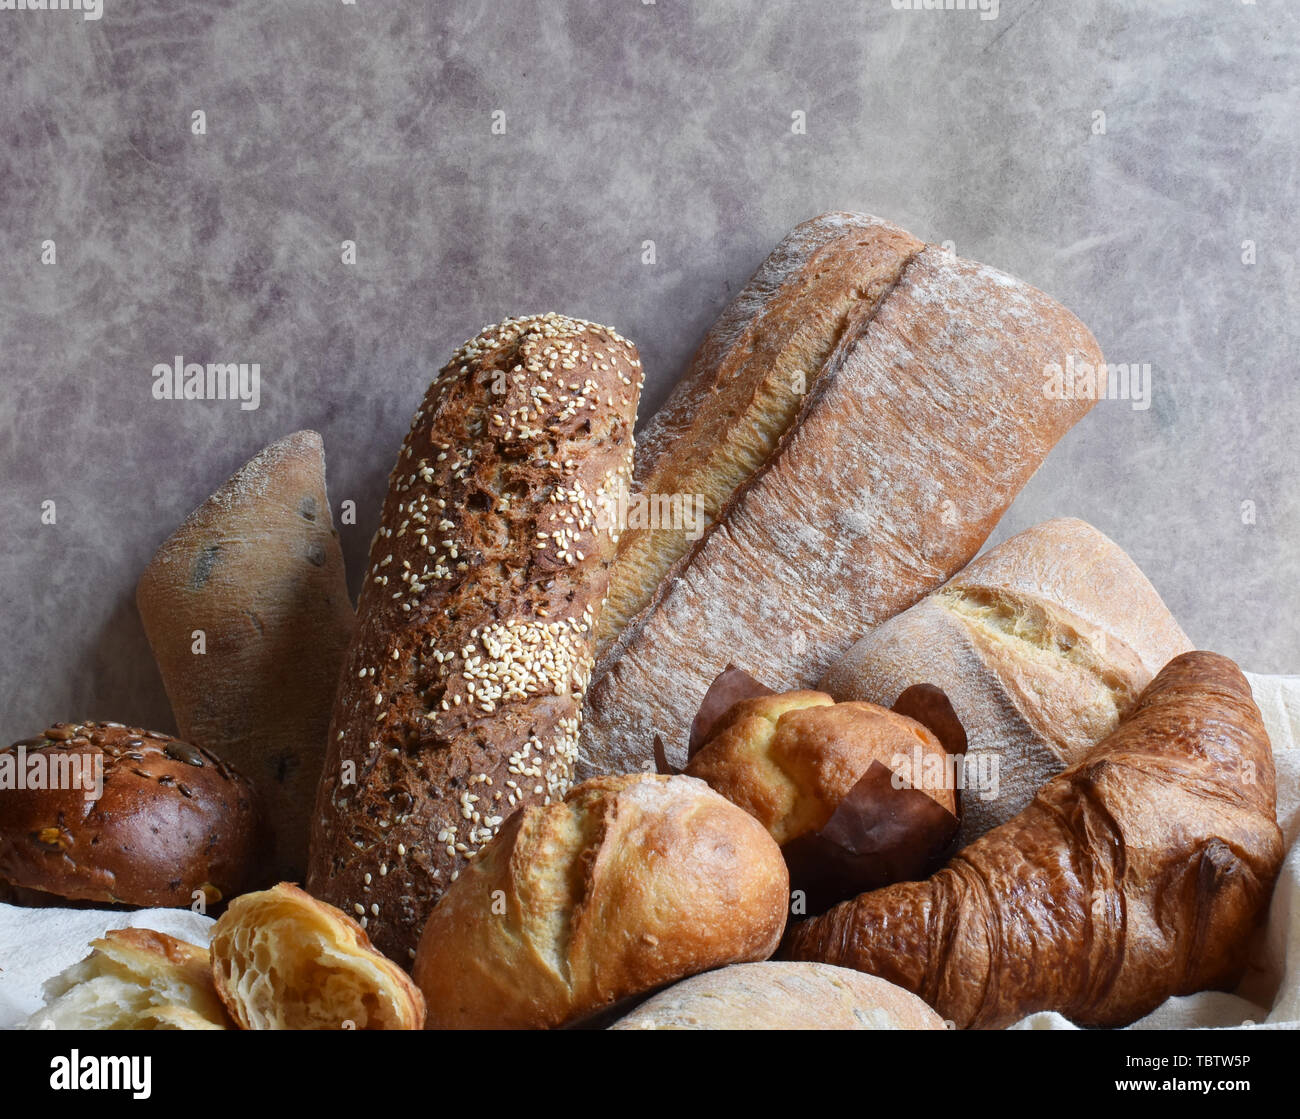 Different types of baking still life. Buns croissants, muffins and loaves, bread patties on textile drapery. Rustic style vintage bakery poster. Rural Stock Photo